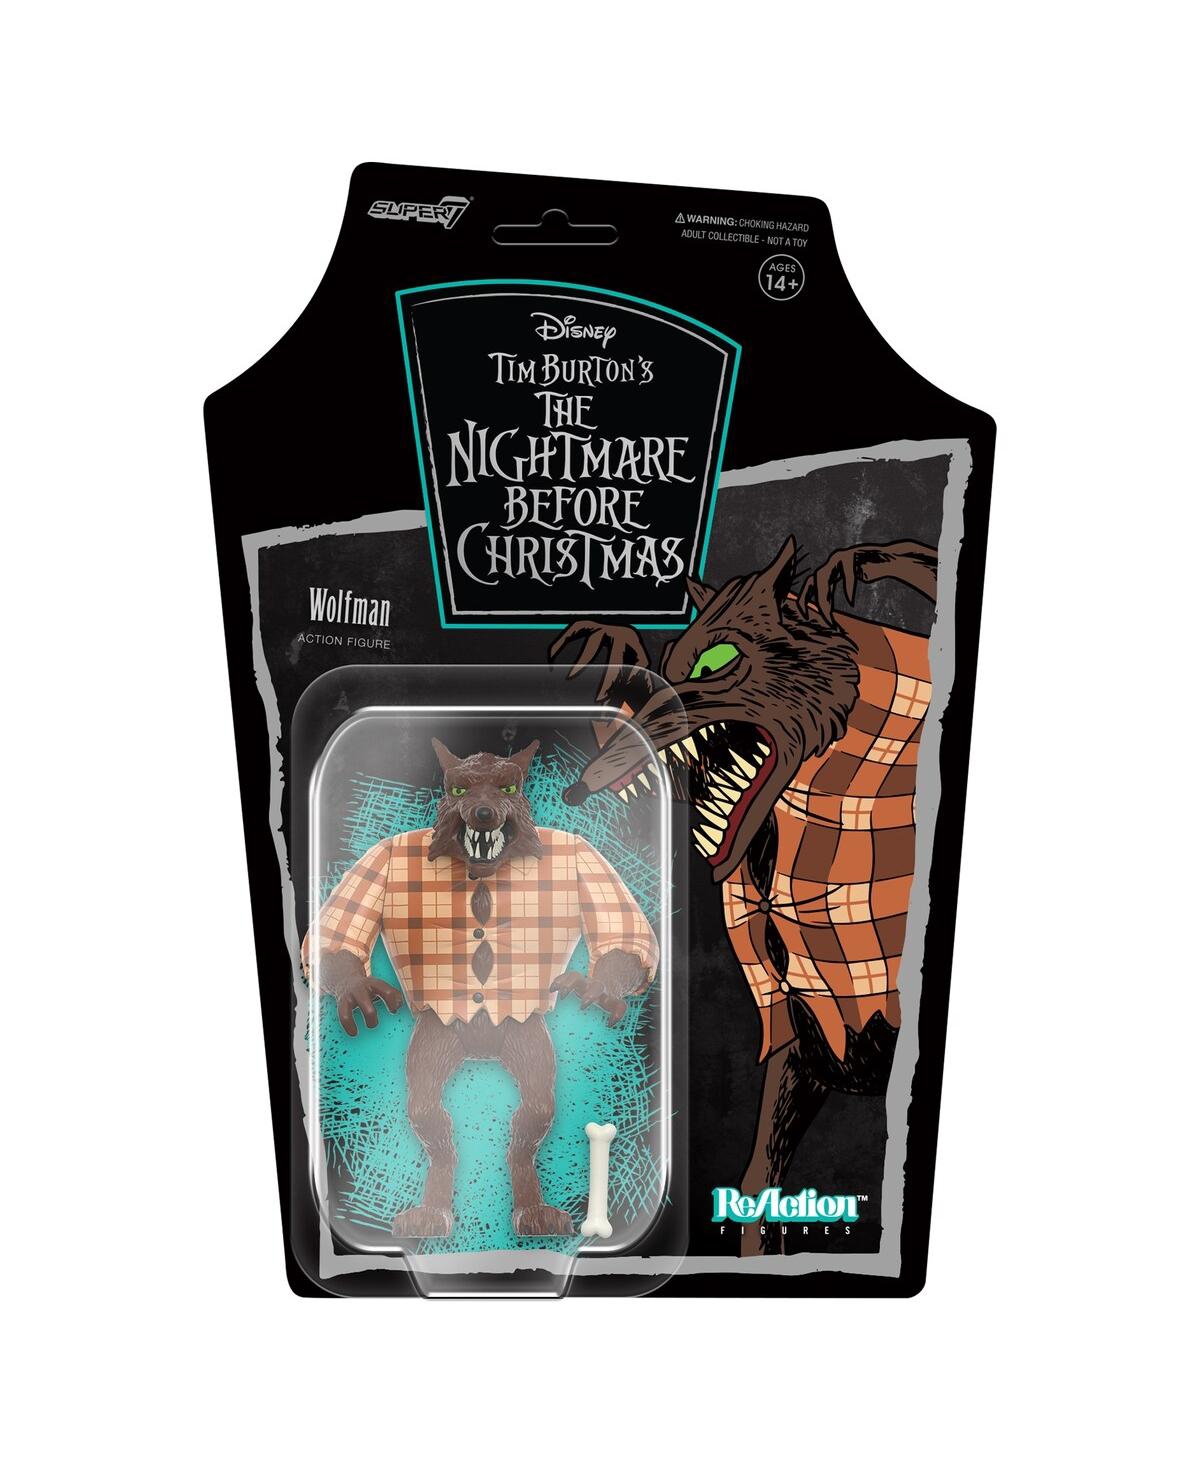 Super 7 Wolfman The Nightmare Before Christmas Reaction Figure In Black